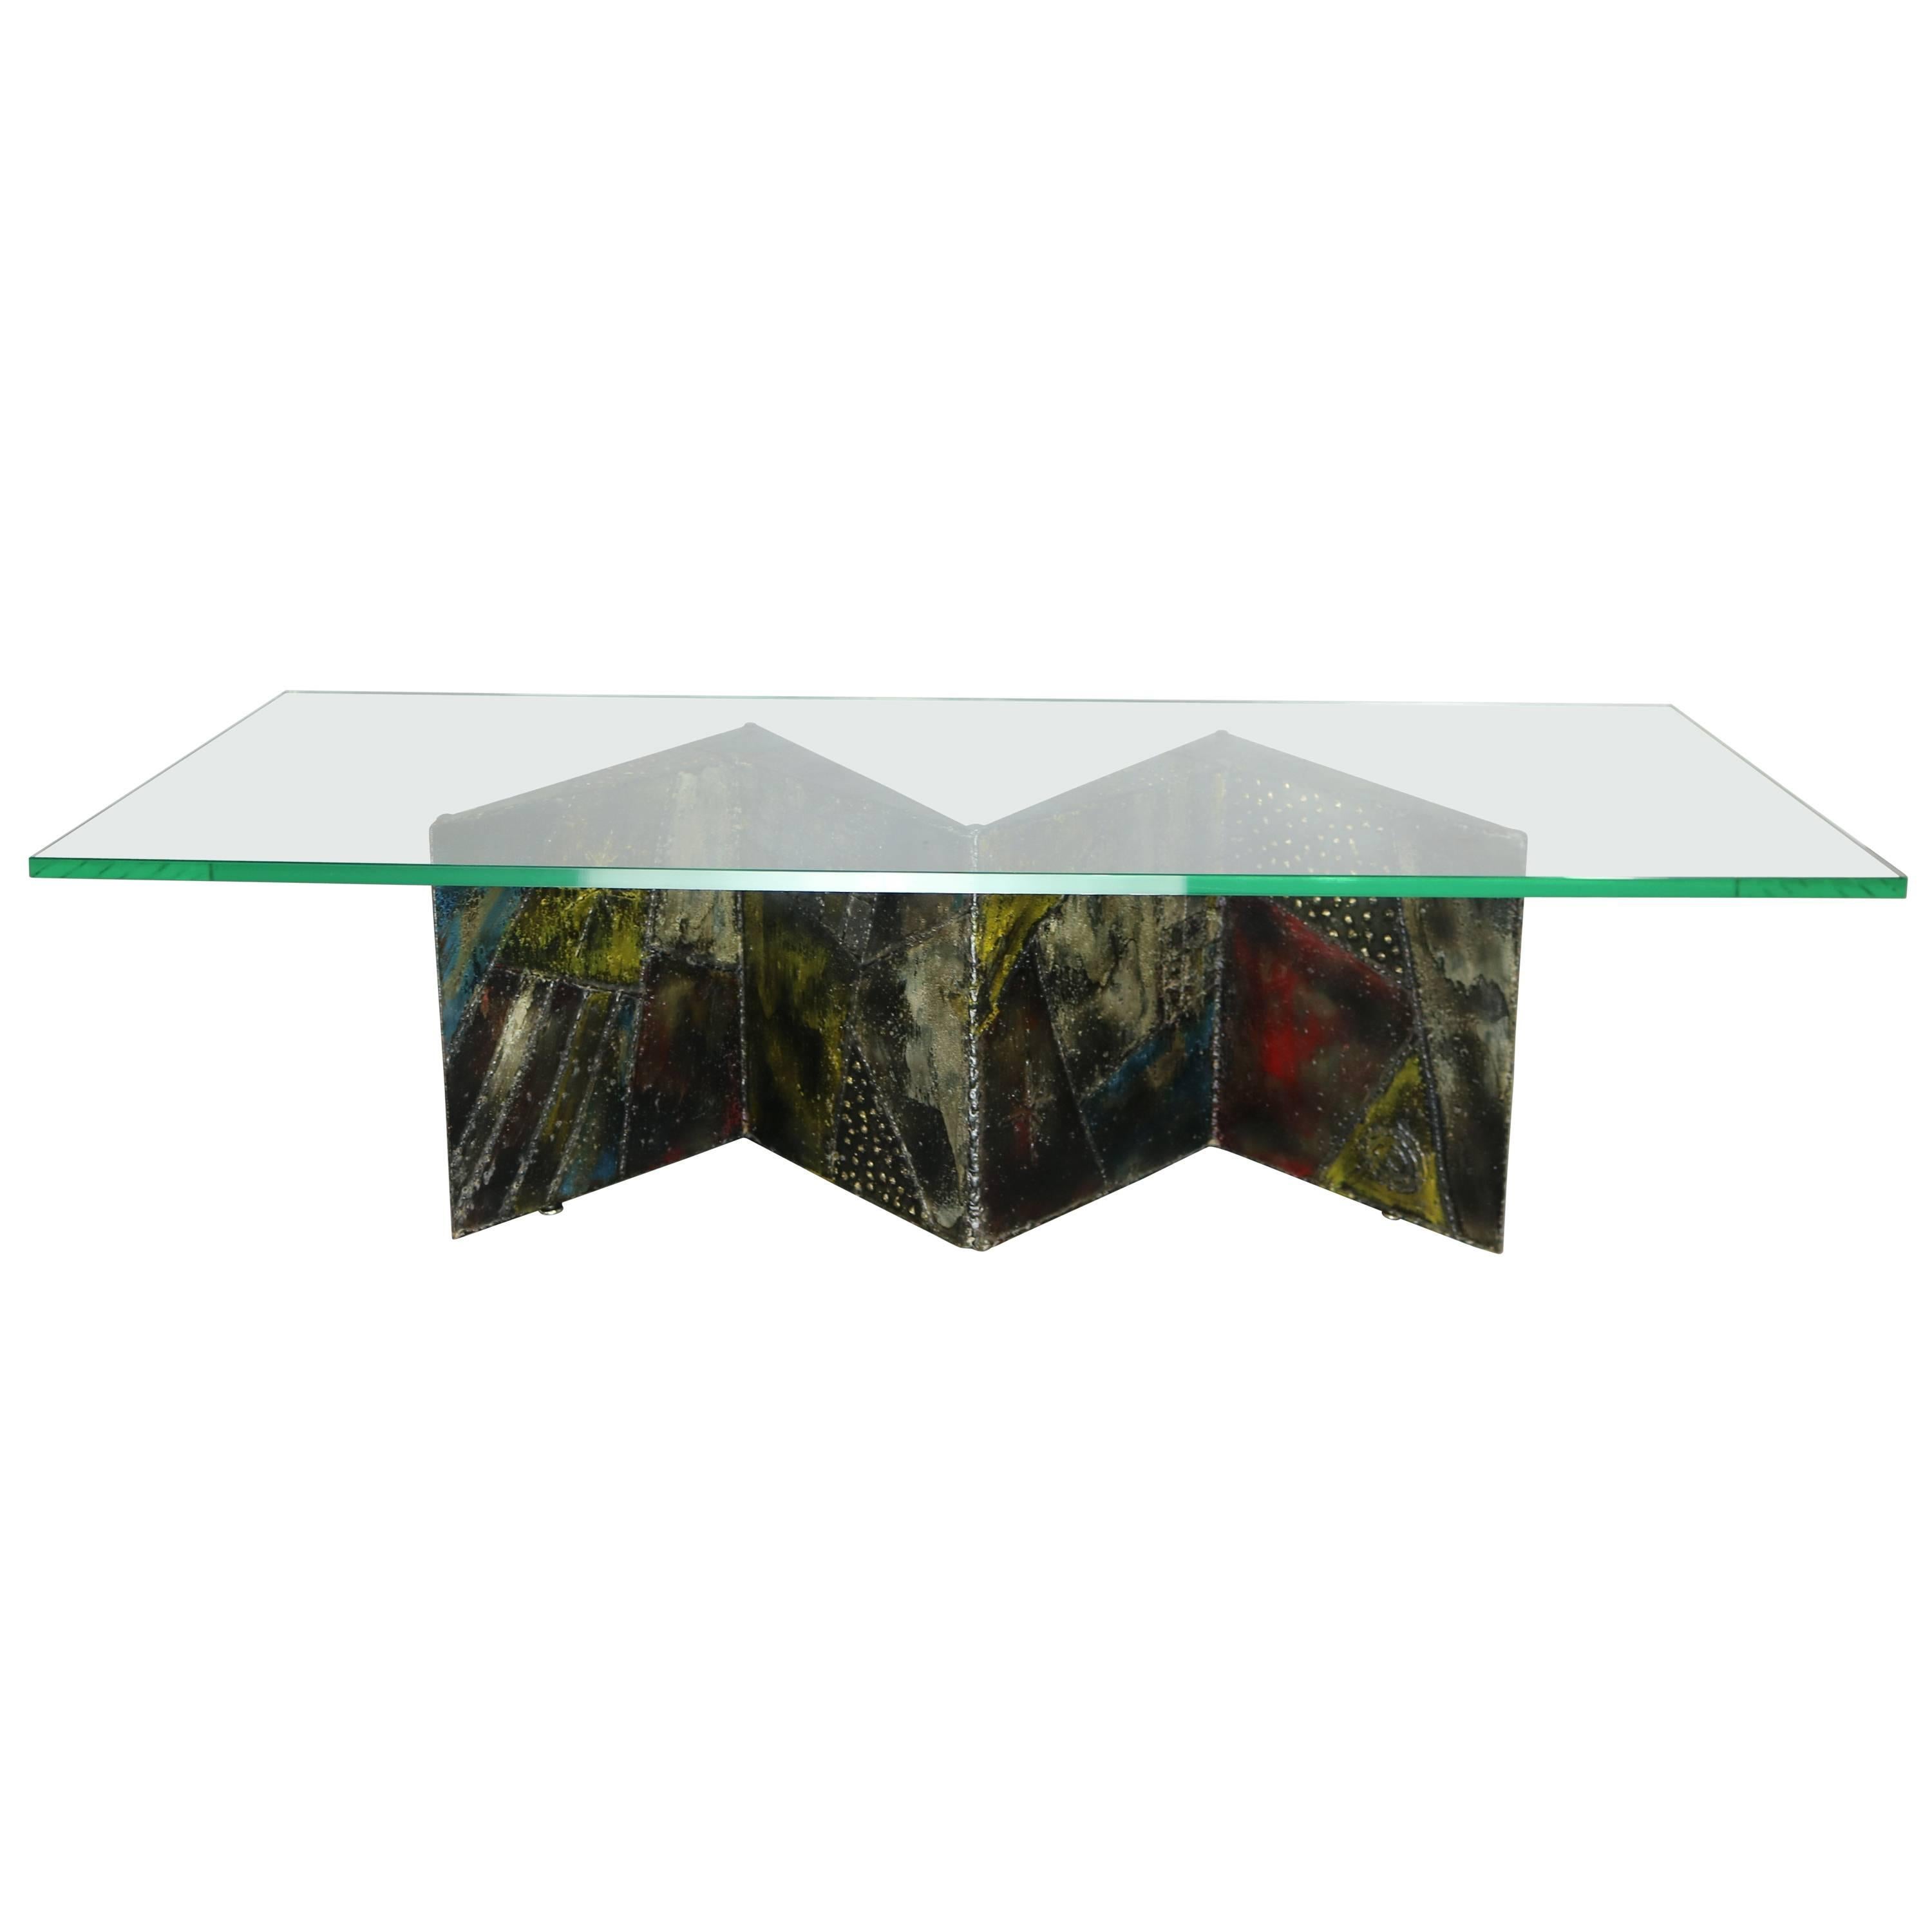 Paul Evans for Directional Zig-Zag Coffee Table